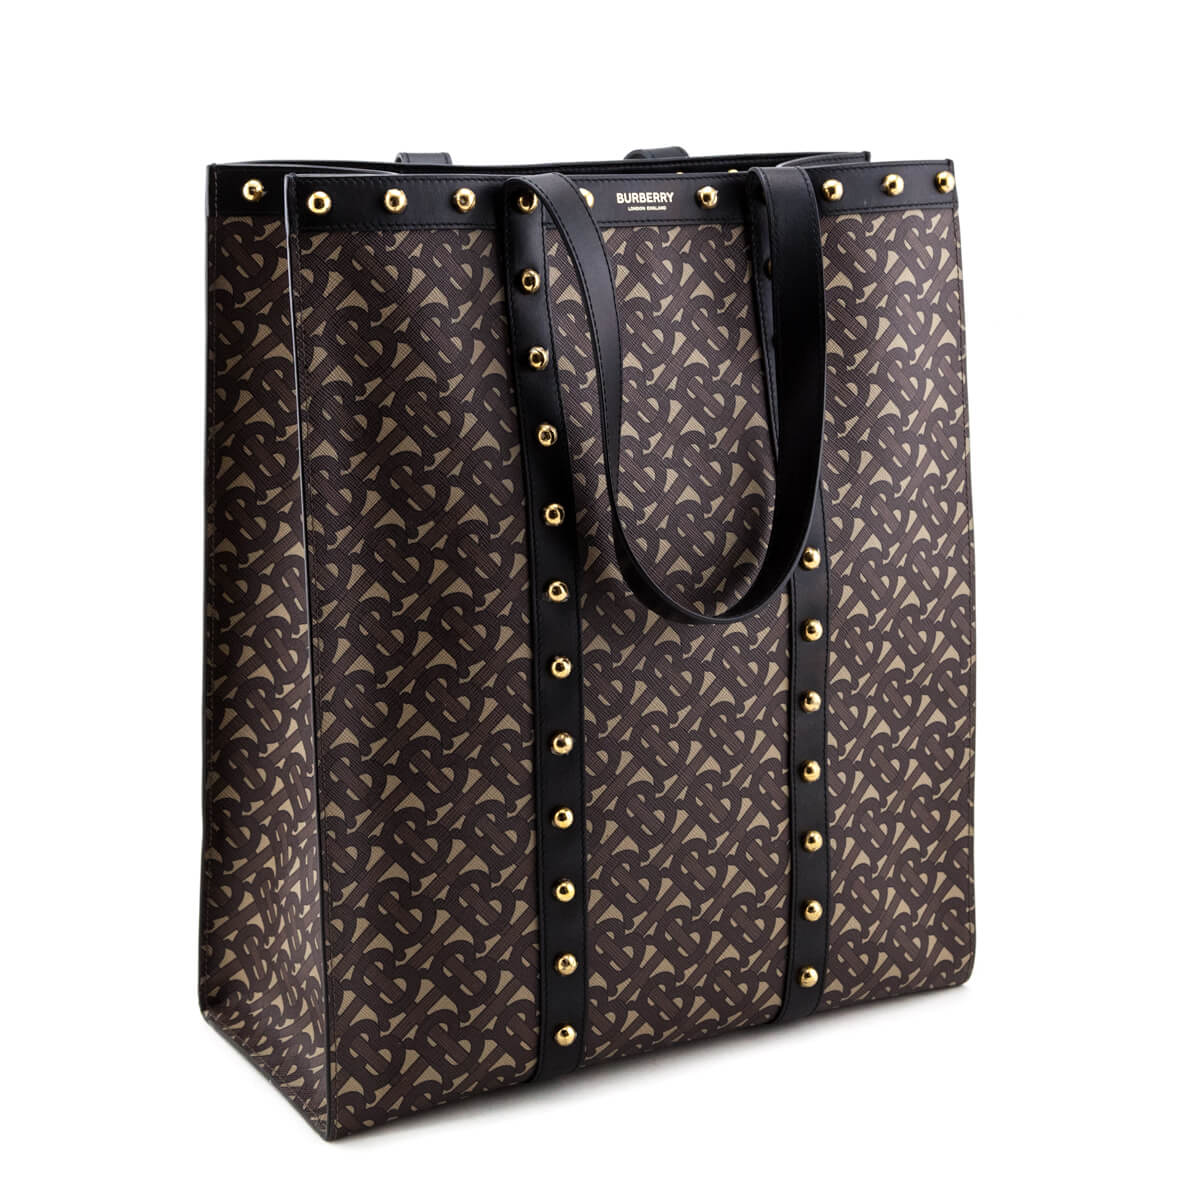 BURBERRY: e-canvas tote bag with monogram print - Brown